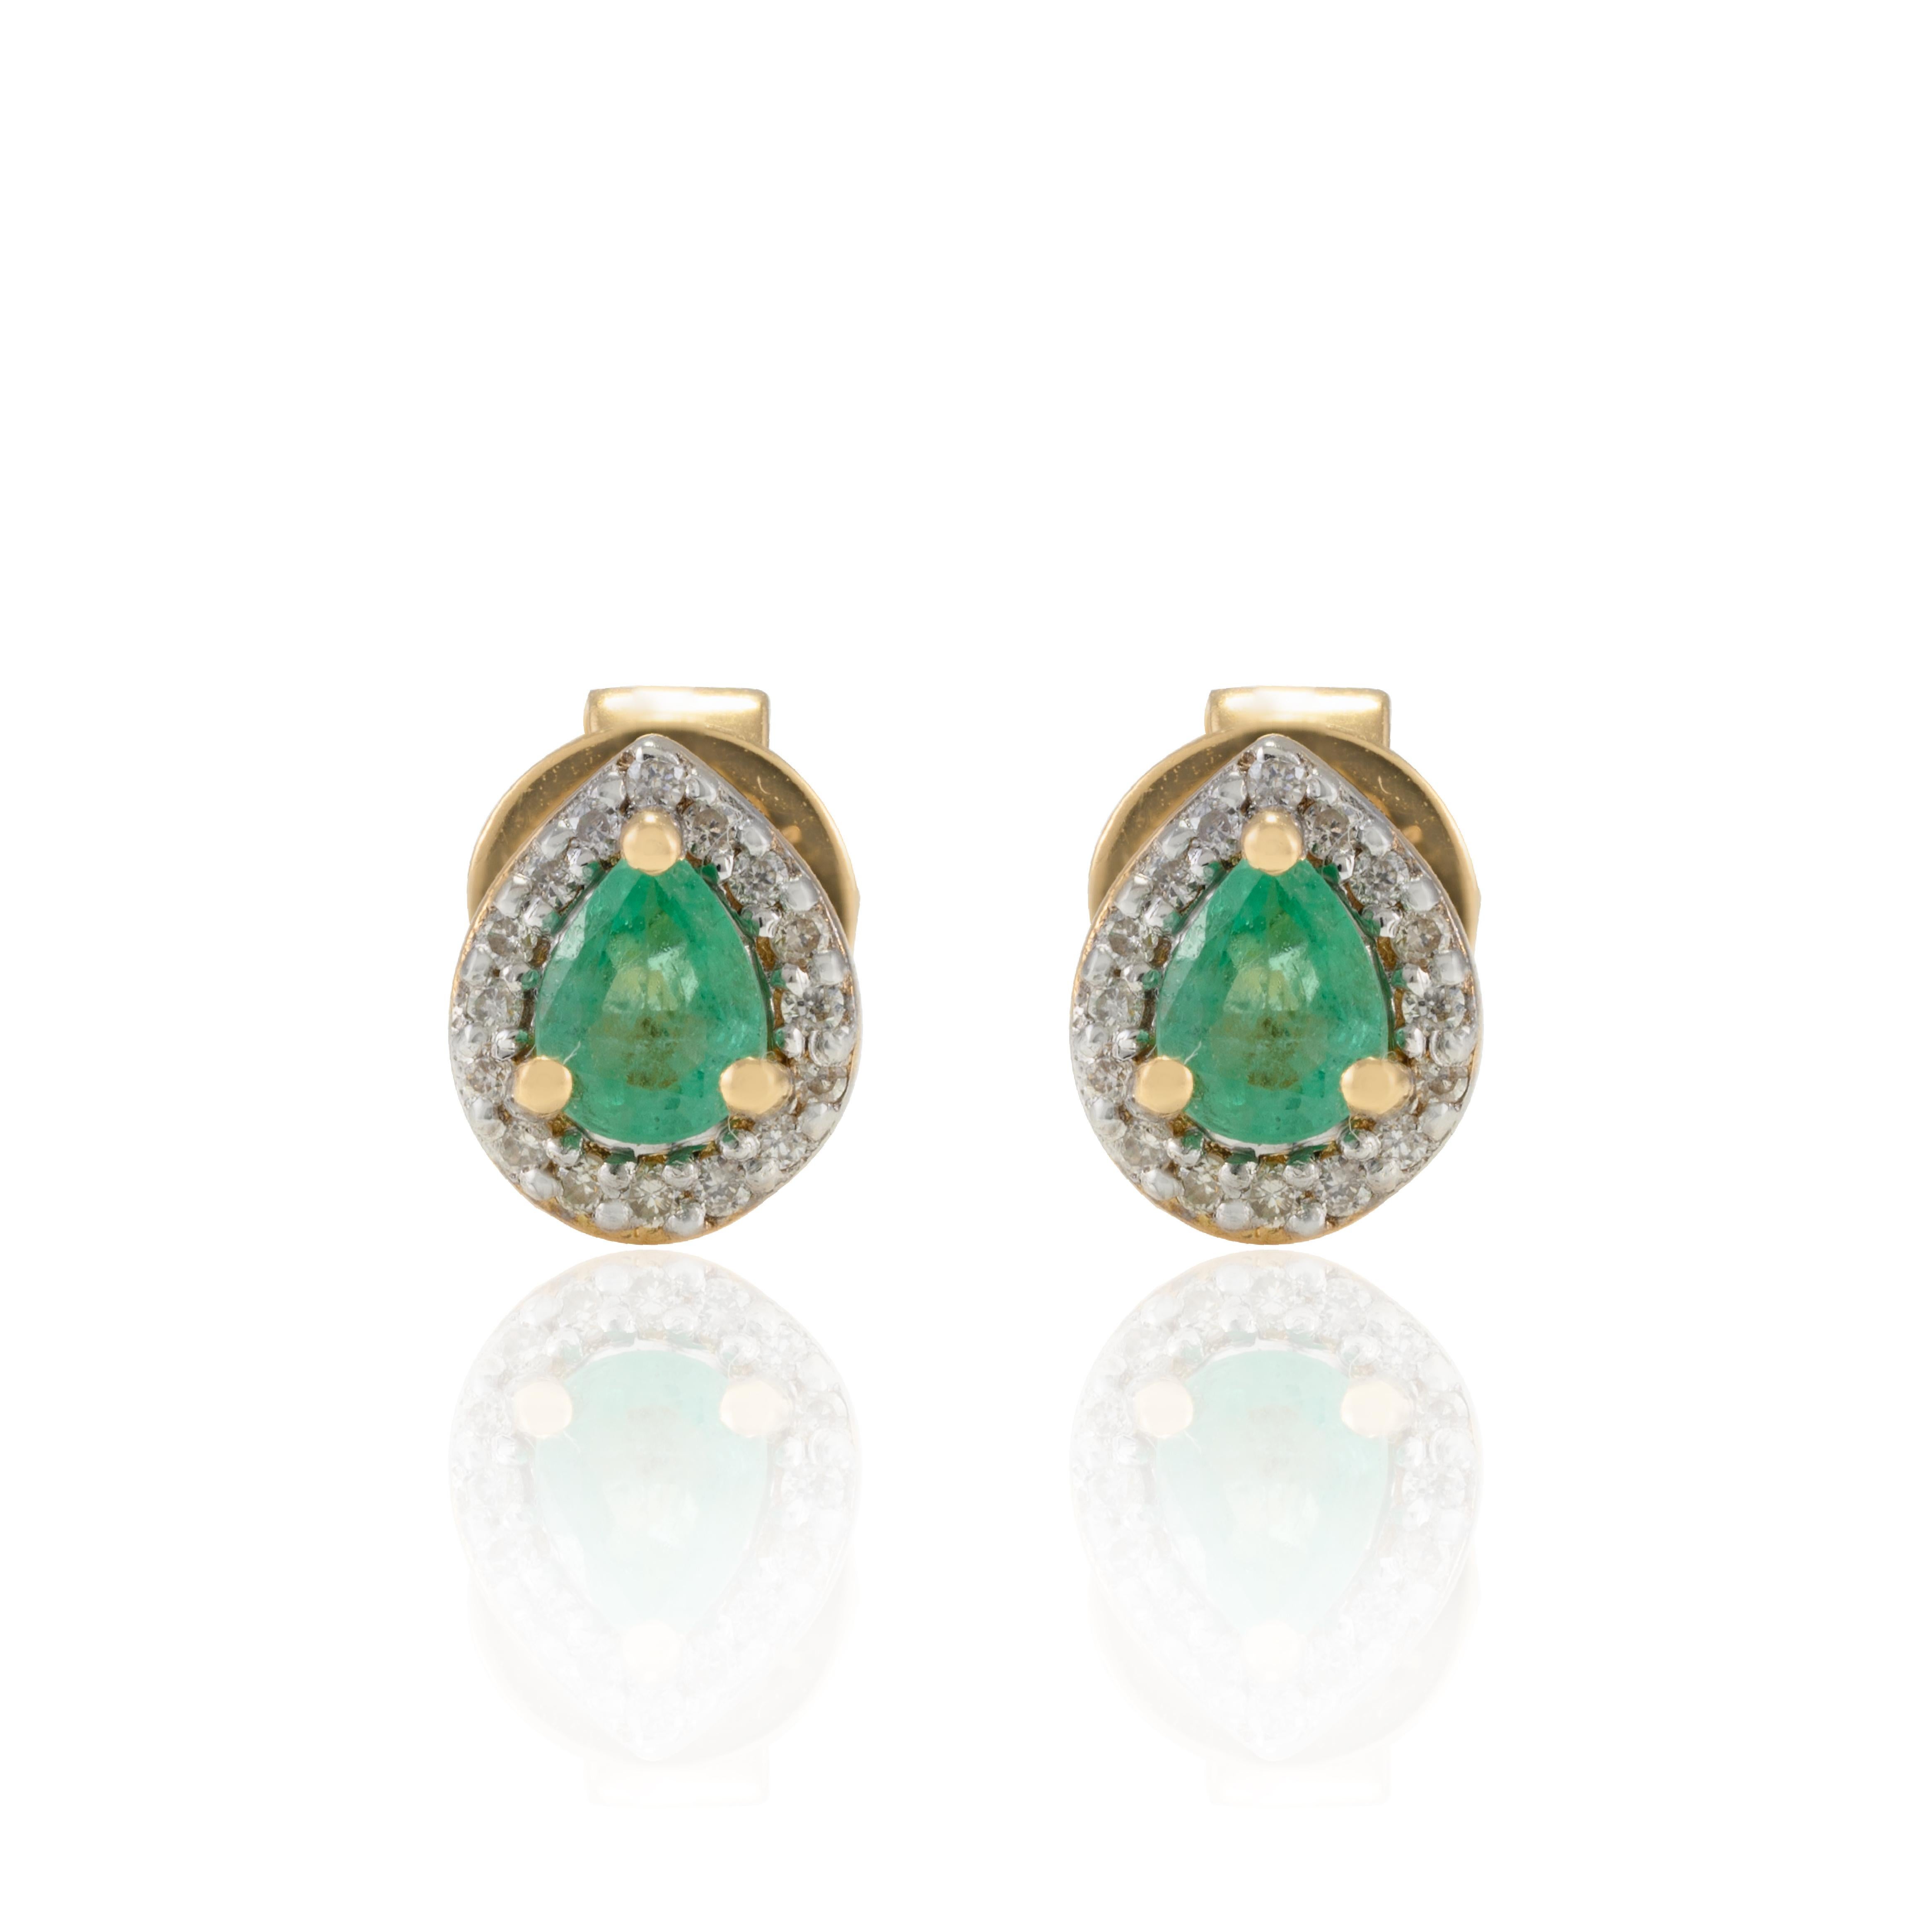 Pear Emerald and Diamond Halo Dainty Stud Earrings in 18K Gold to make a statement with your look. You shall need stud earrings to make a statement with your look. These earrings create a sparkling, luxurious look featuring pear cut emerald.
Emerald